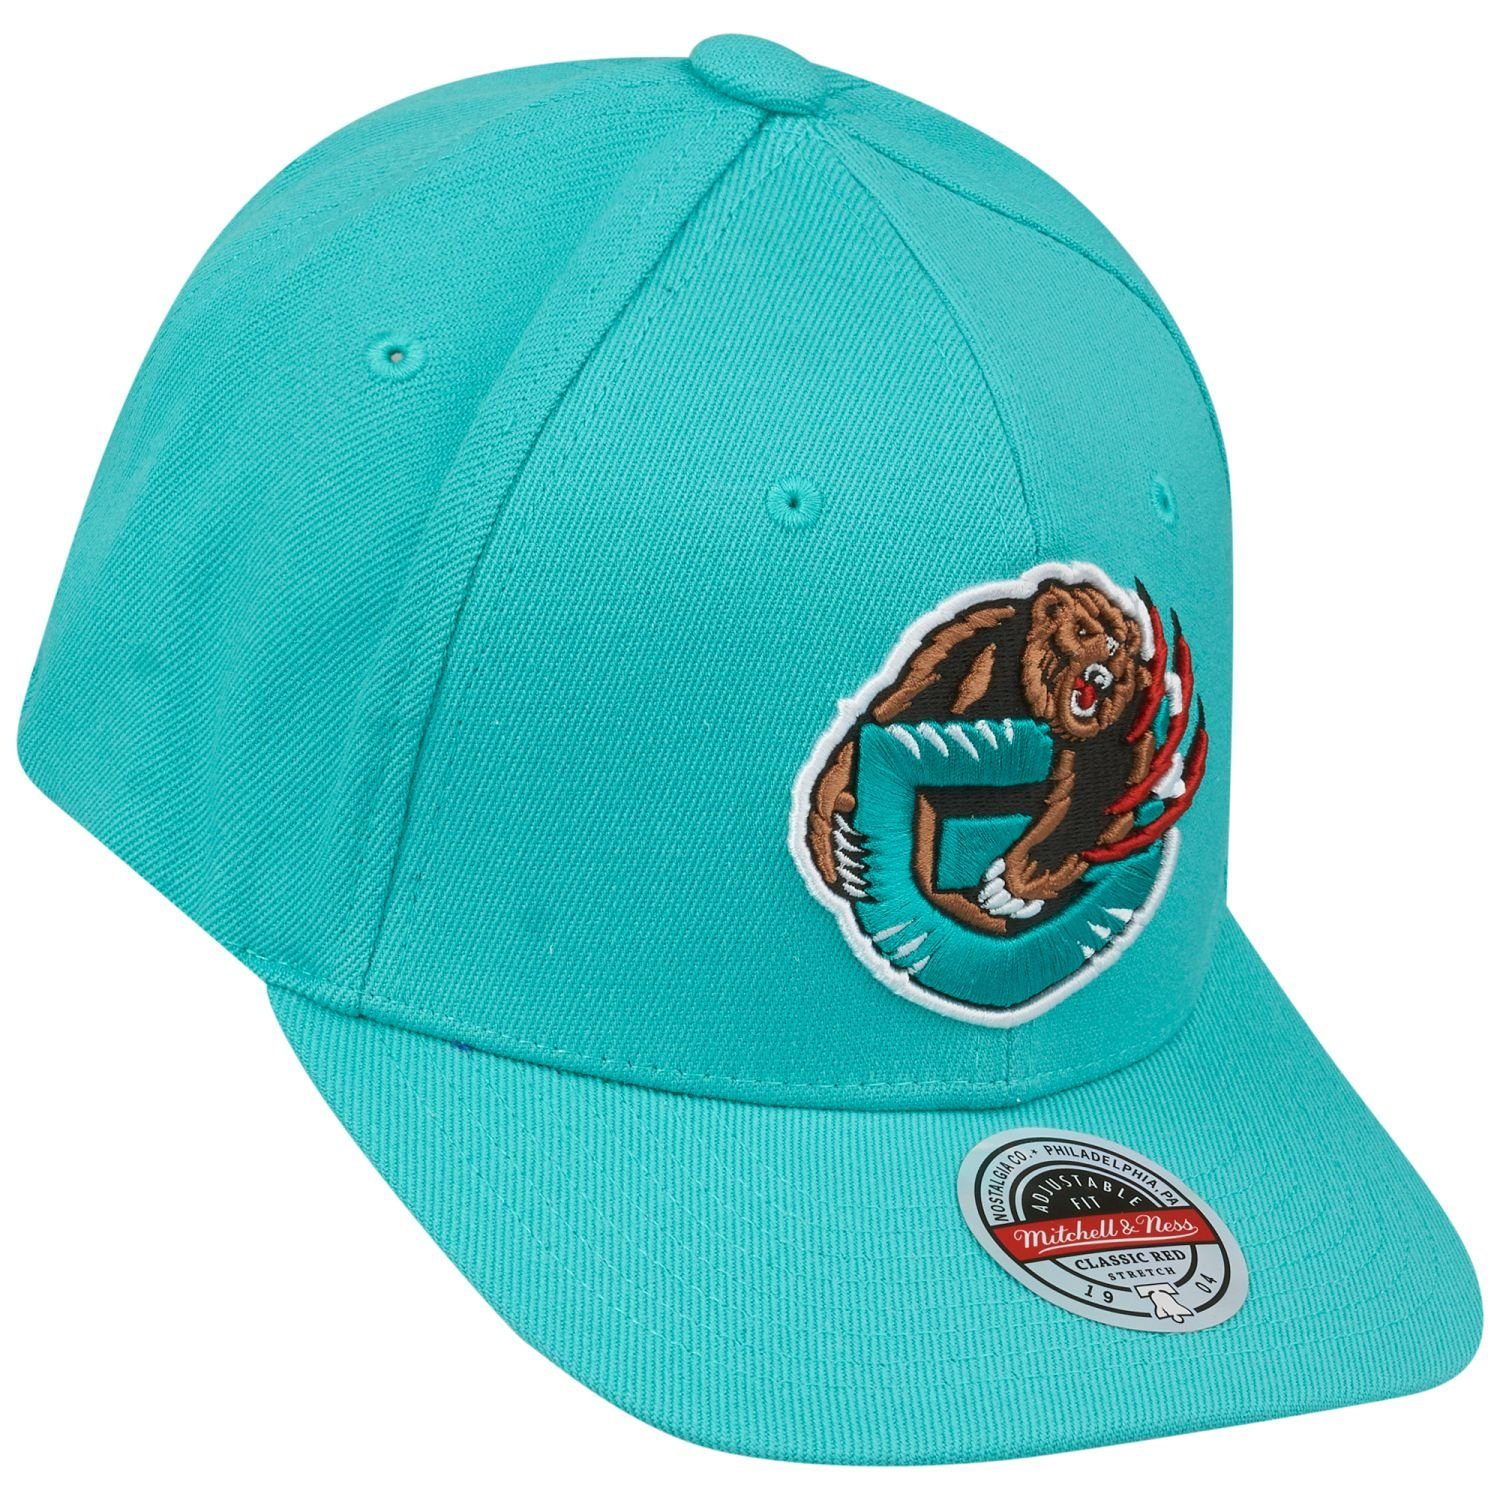 Grizzlies Ness Vancouver & Mitchell Cap HWC Stretch Snapback